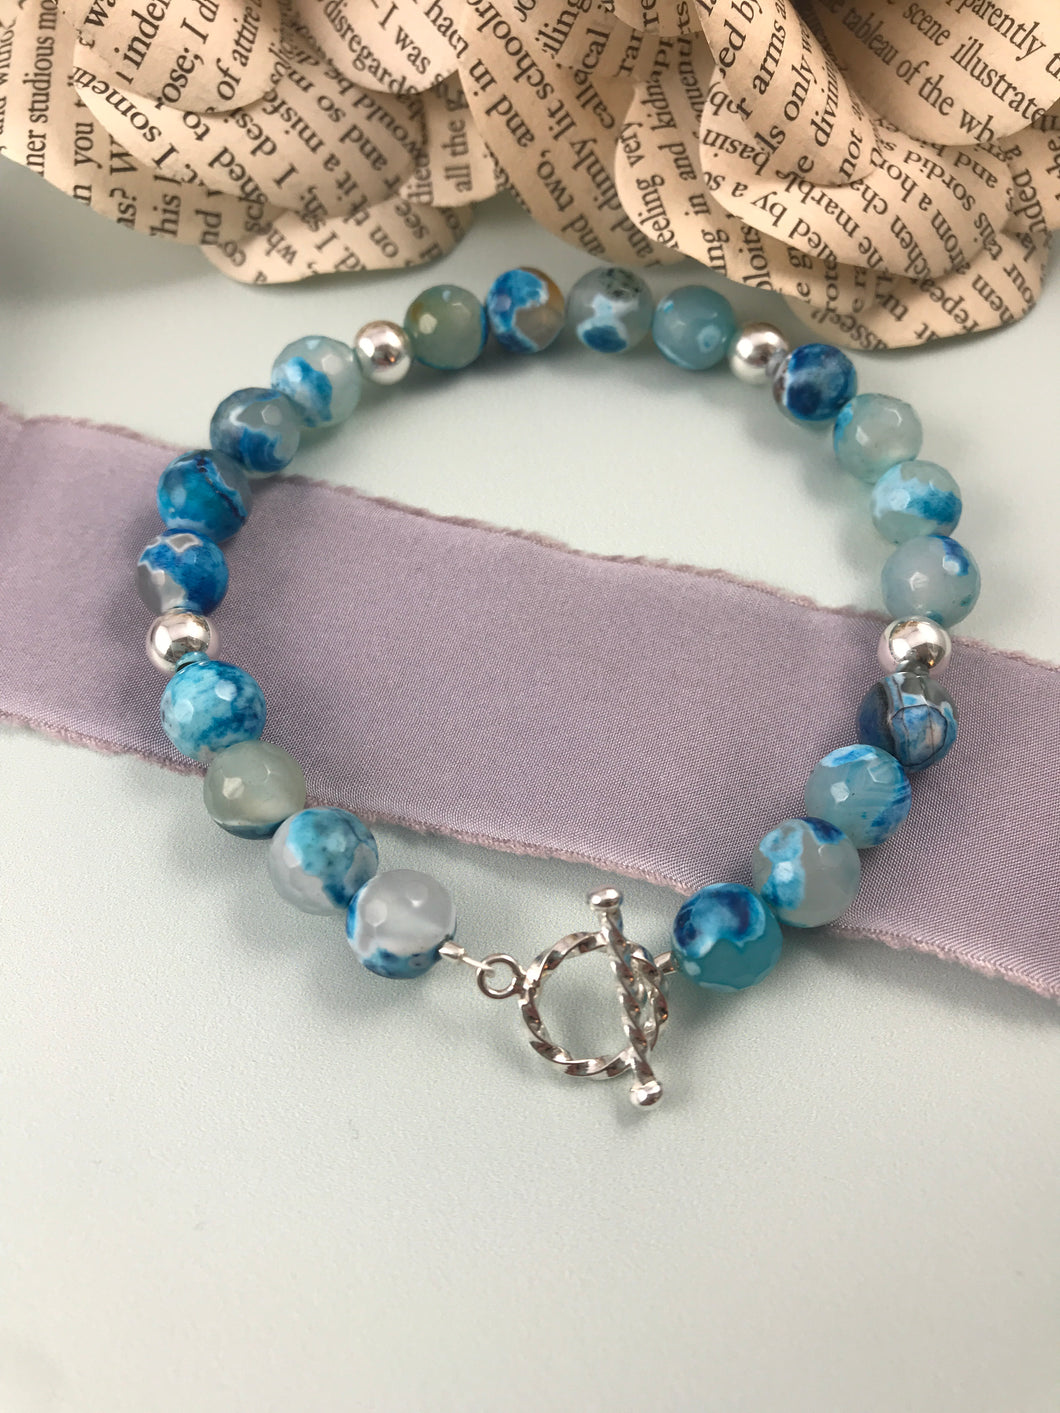 Blue Agate and Twisted Toggle Bracelet